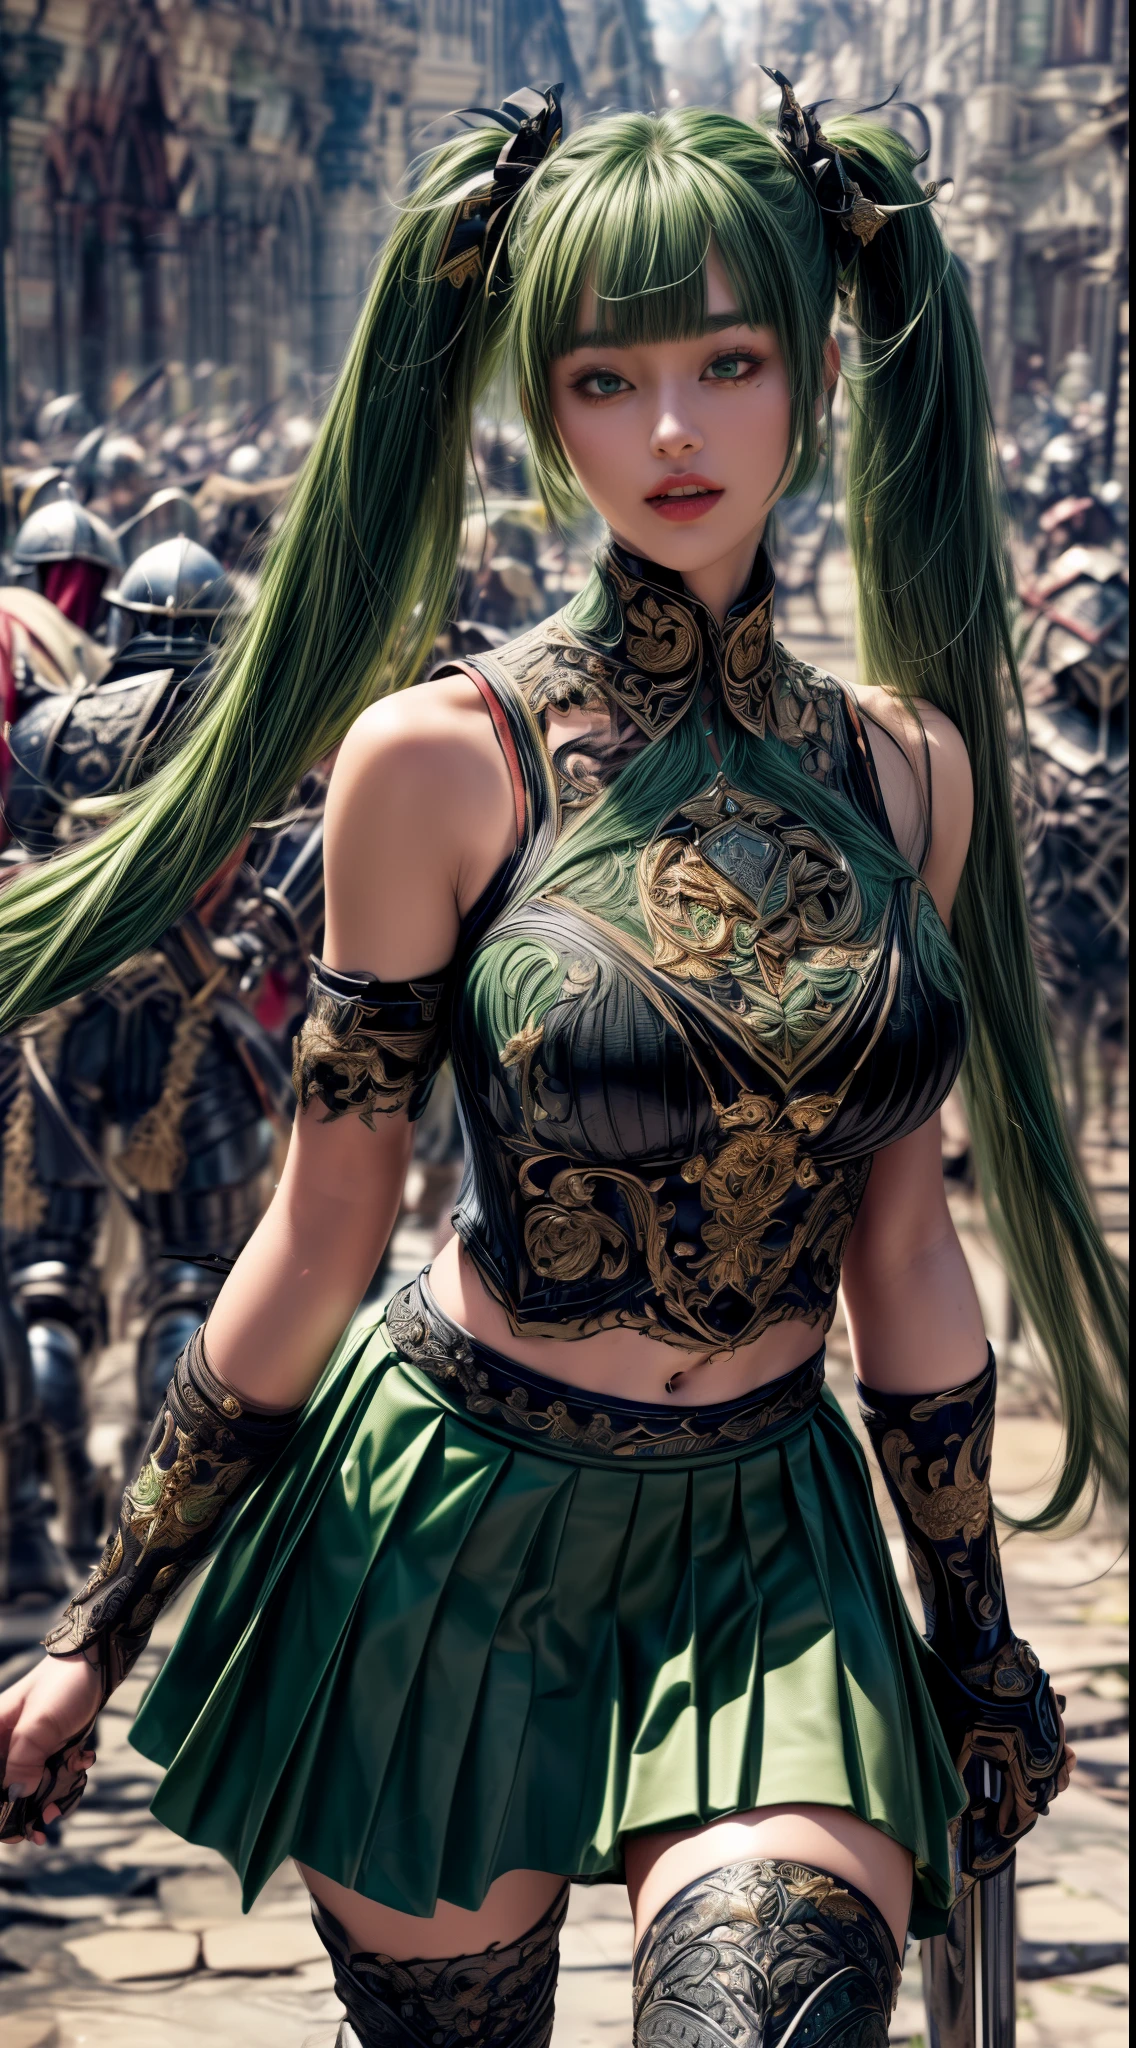 Very beautiful girl、laughing、Slender、(((low length)))、(Detailed face)、Realistic Skin、((holy knight)), ((Dark Green Armor))、((((Black armor with very fine and intricate decoration:1.1))))、((Delicate photo))，(Girl Astepeace RAW Photo Details:1.25), (highest quality:1.6), (超A high resolution:1.5), (Realistic:1.75), 8K resolution, Canon EOS R5, 50mm, Absurd, Ultra-detailed,Cinema Lighting,((battlefield))、((battle))、(((Decorative green skirt)))、Thigh-high socks、Shin Guards、((Dark green hair))、((Twin tails))、((Hairstyle with bangs))、Get six-pack、Cape、Beautiful Armor、(((Has a huge weapon)))、(In combat)、The wind is blowing、((Symmetrical Armor))、((((tornado))))、(((Leading a large group of knights:1.2)))、Banner、Lion-themed armor